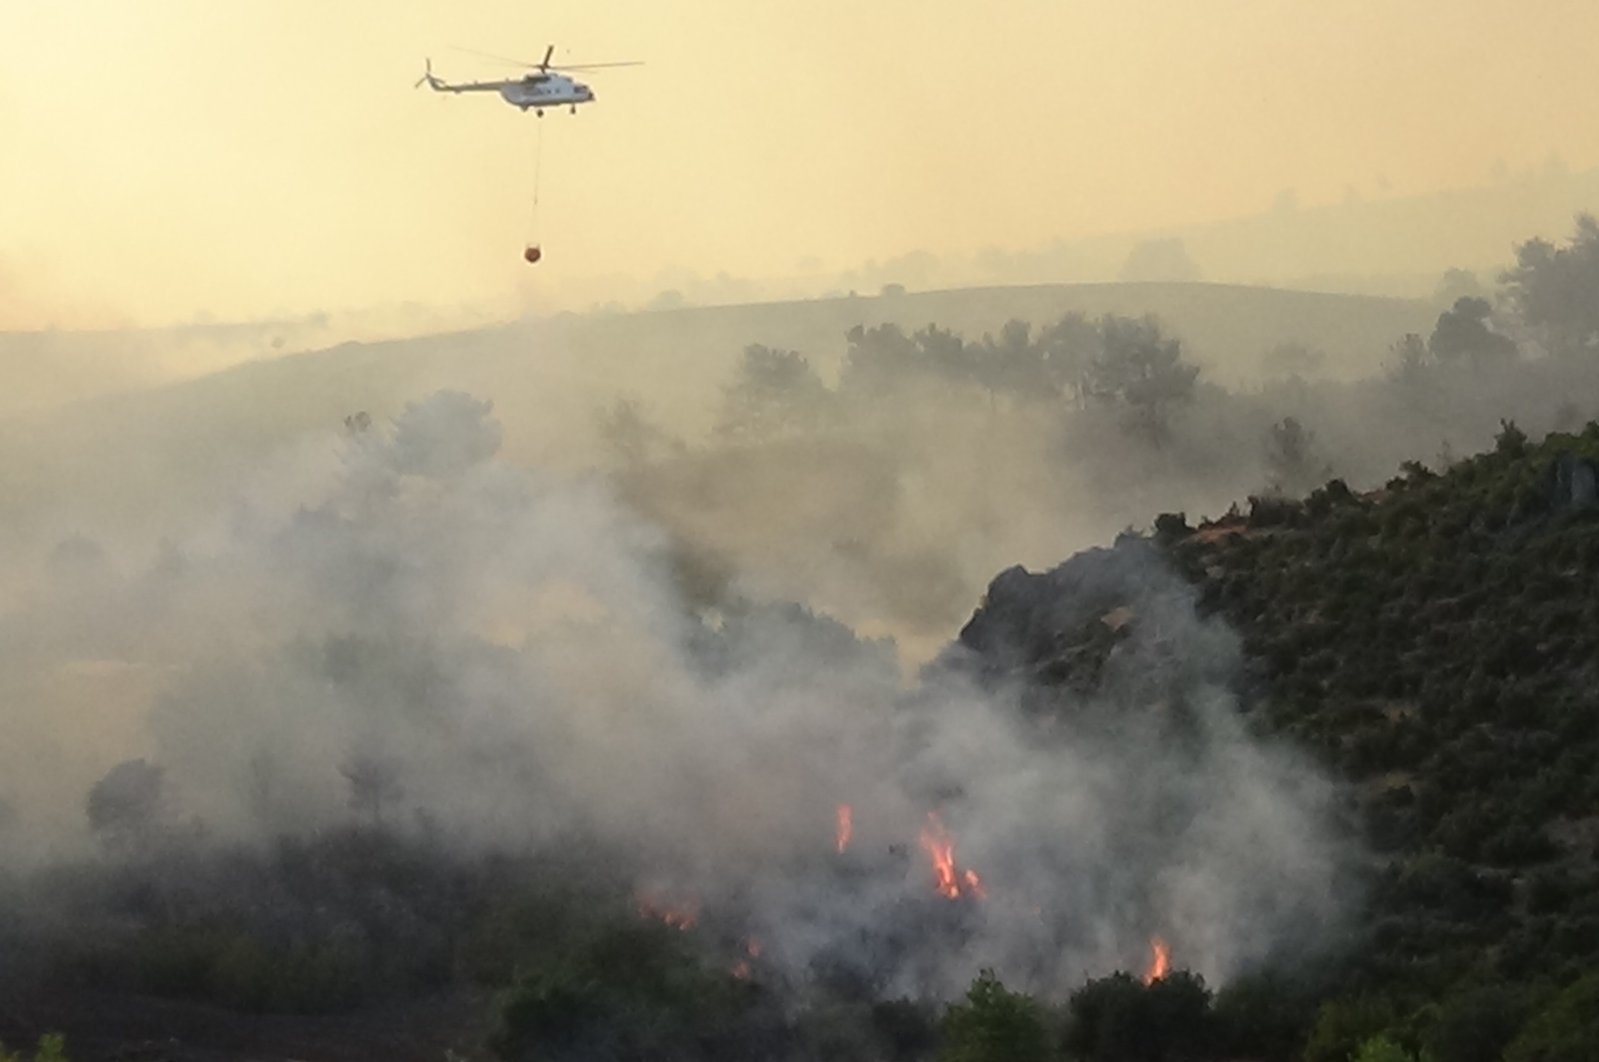 A helicopter is seen extinguishing a fire over the forests in Çanakkale, Türkiye, July 18, 2023. (IHA Photo)